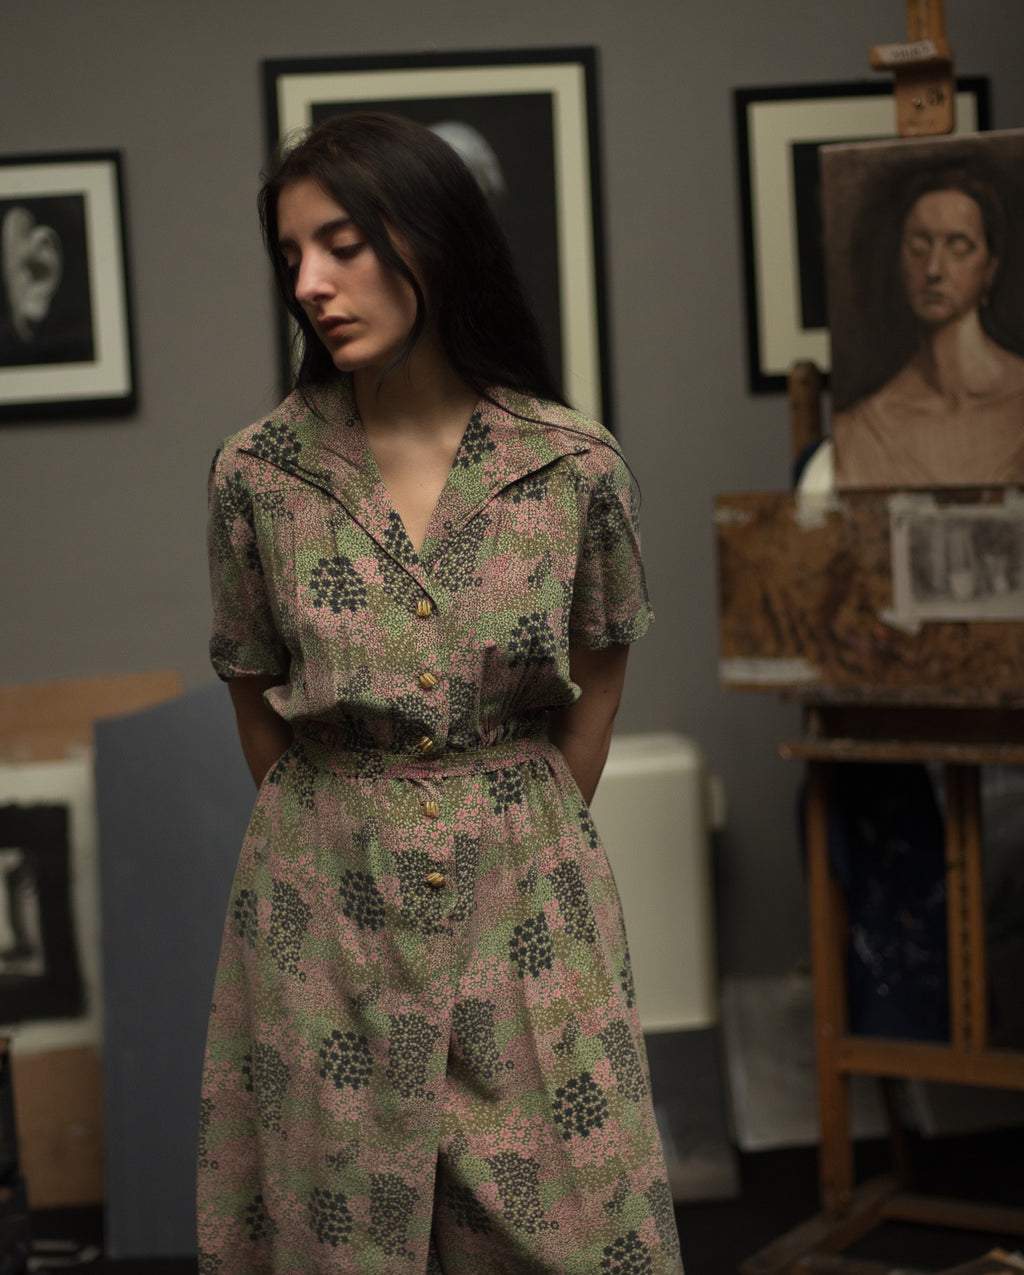 1960s handmade silk ditsy floral shirt dress, fits up to large